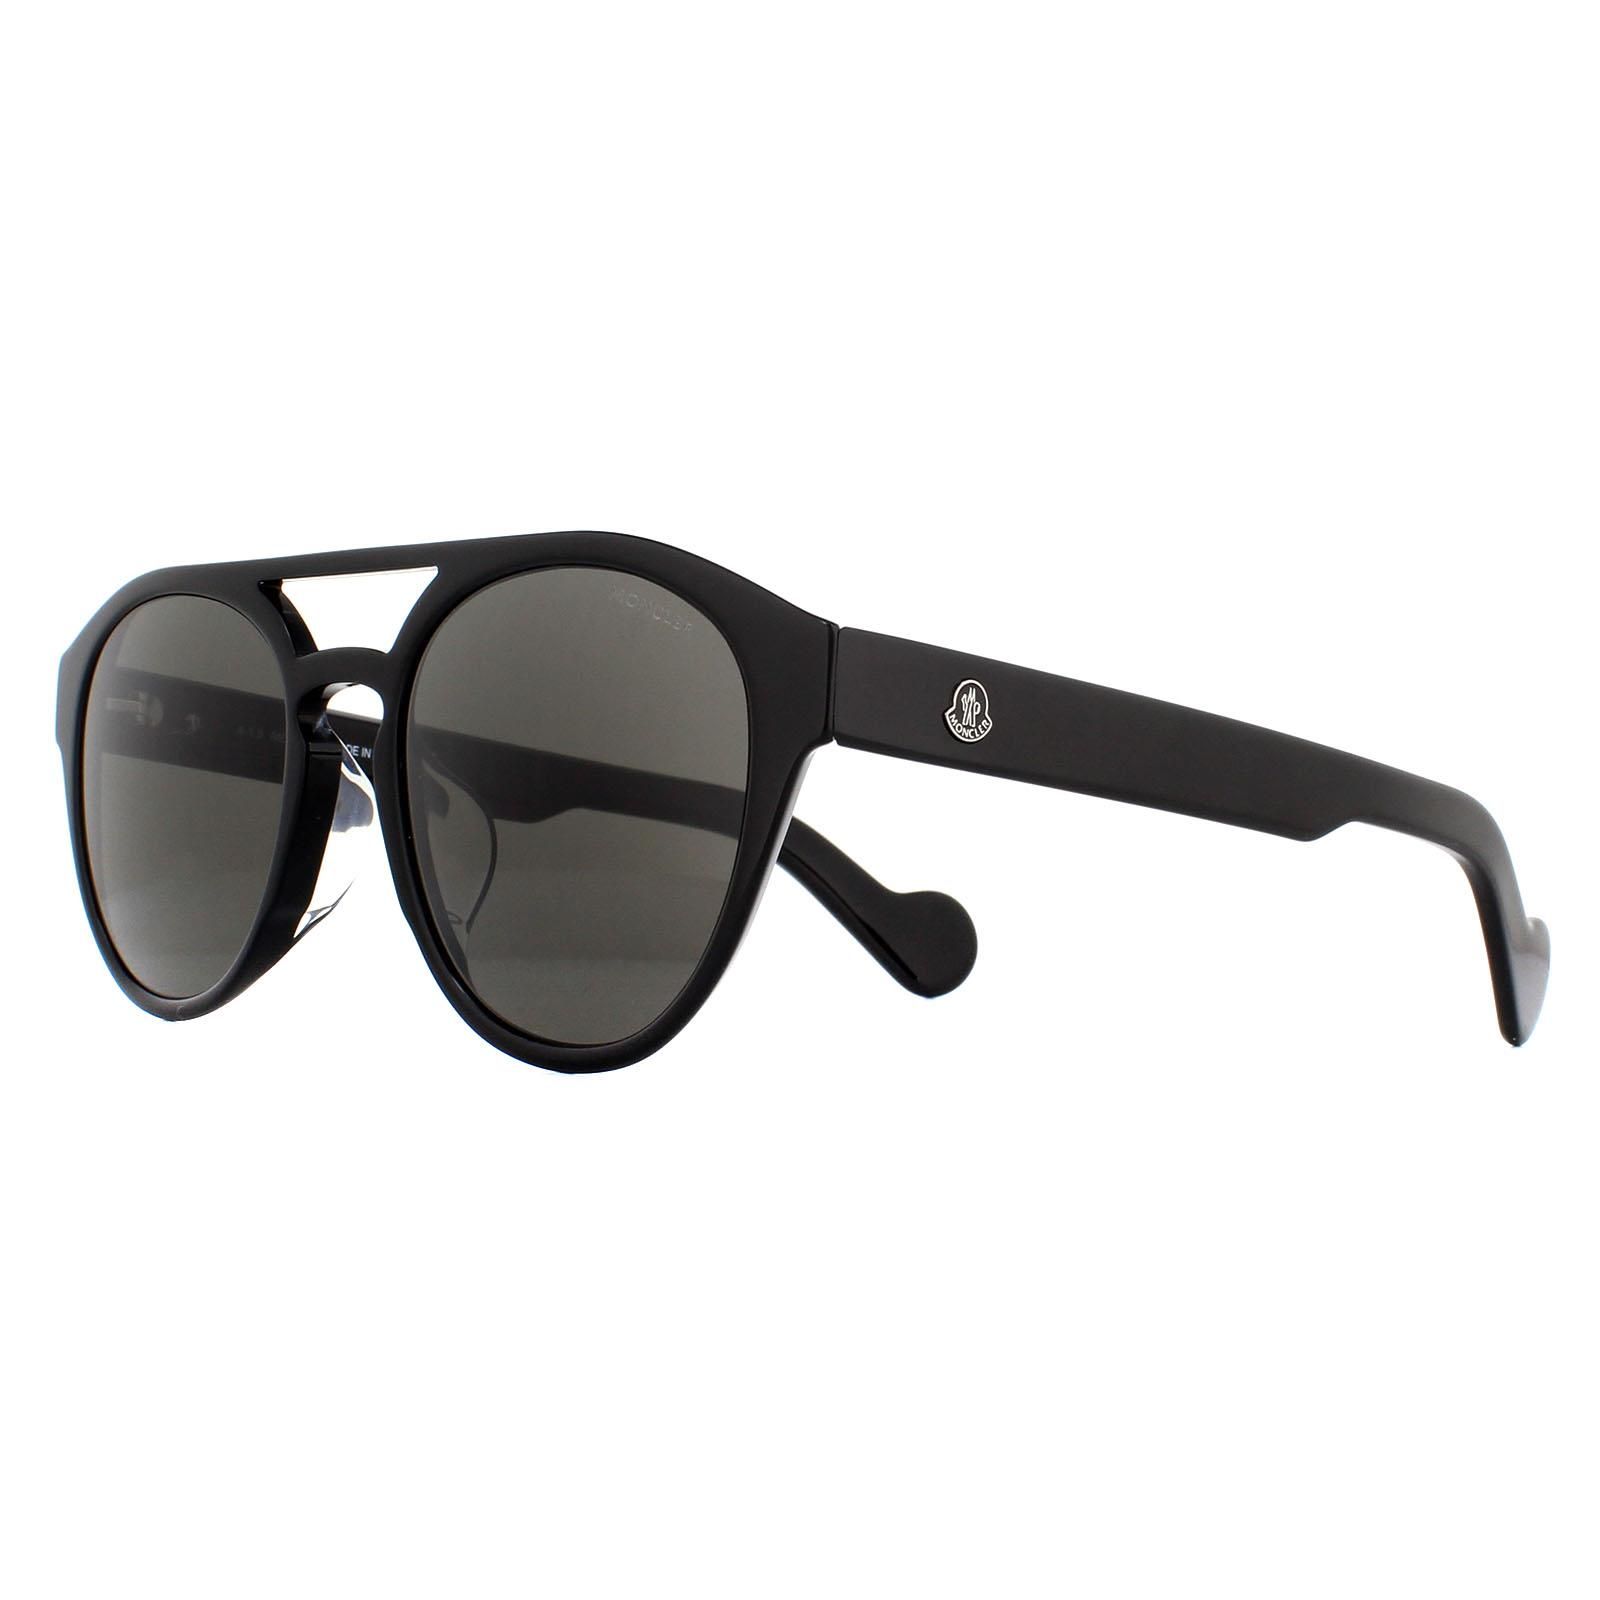 Moncler Sunglasses ML0075F 01A Shiny Black Smoke are a statement pair with rounded lenses and top bar. The lightweight acetate frame features the Moncler logo on the temples for brand recognition.